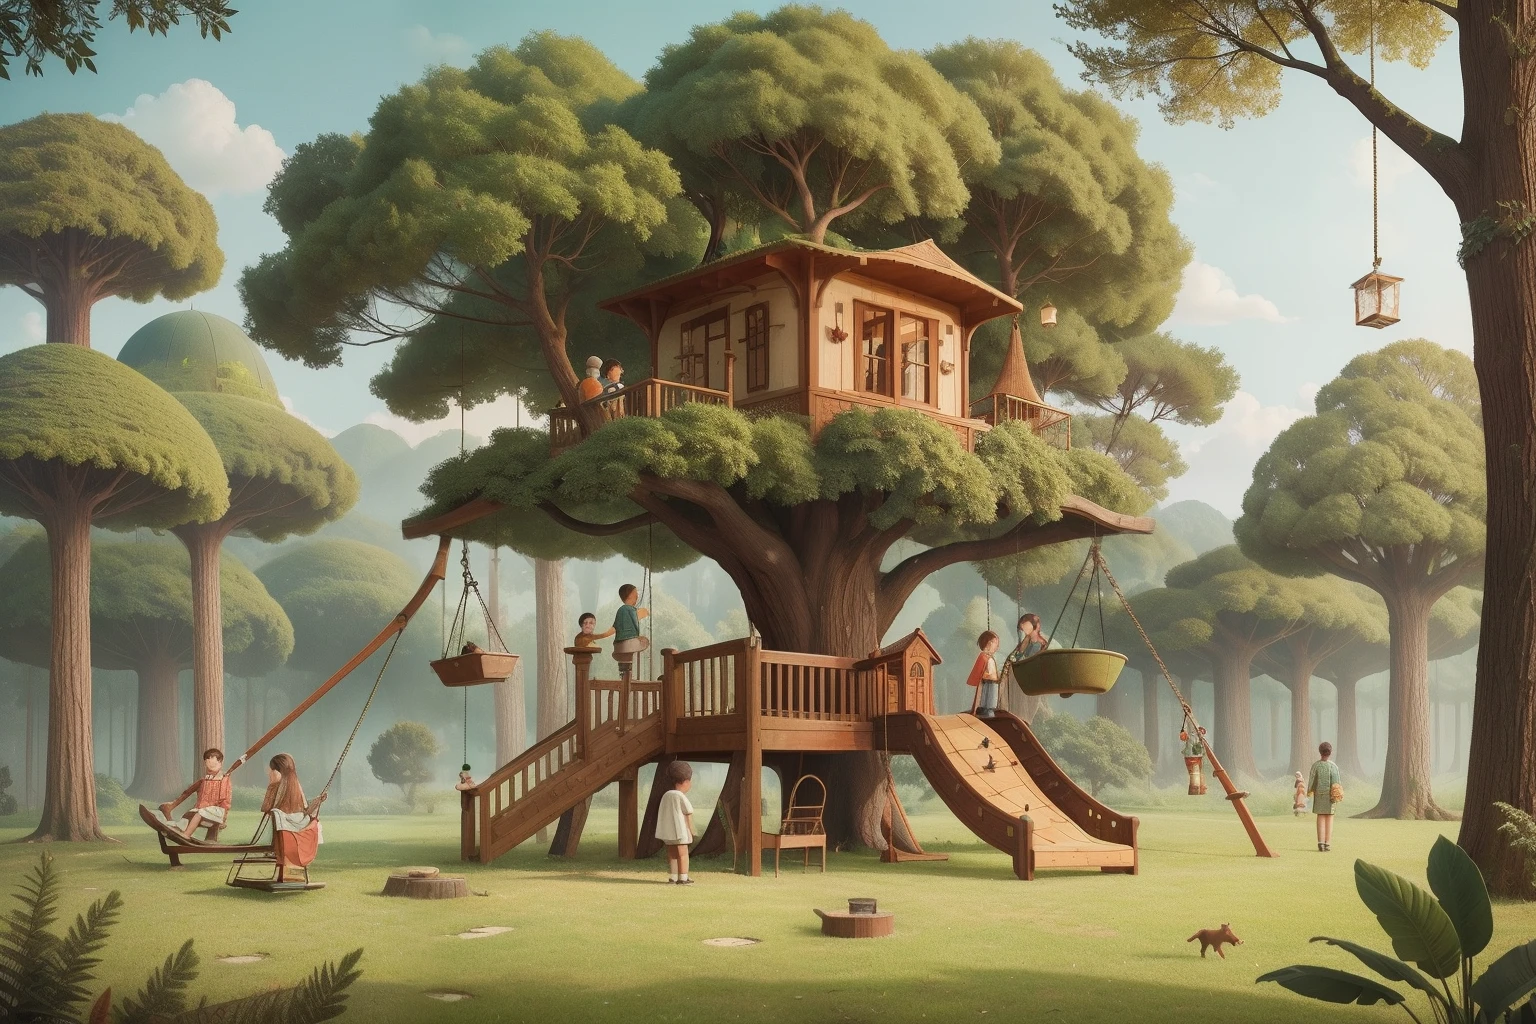 Amidst a surreal Wes Anderson forest, a colossal tree adorned with swing sets and intricate treehouses rises into the sky, while tiny people in the distance explore this arboreal wonderland.